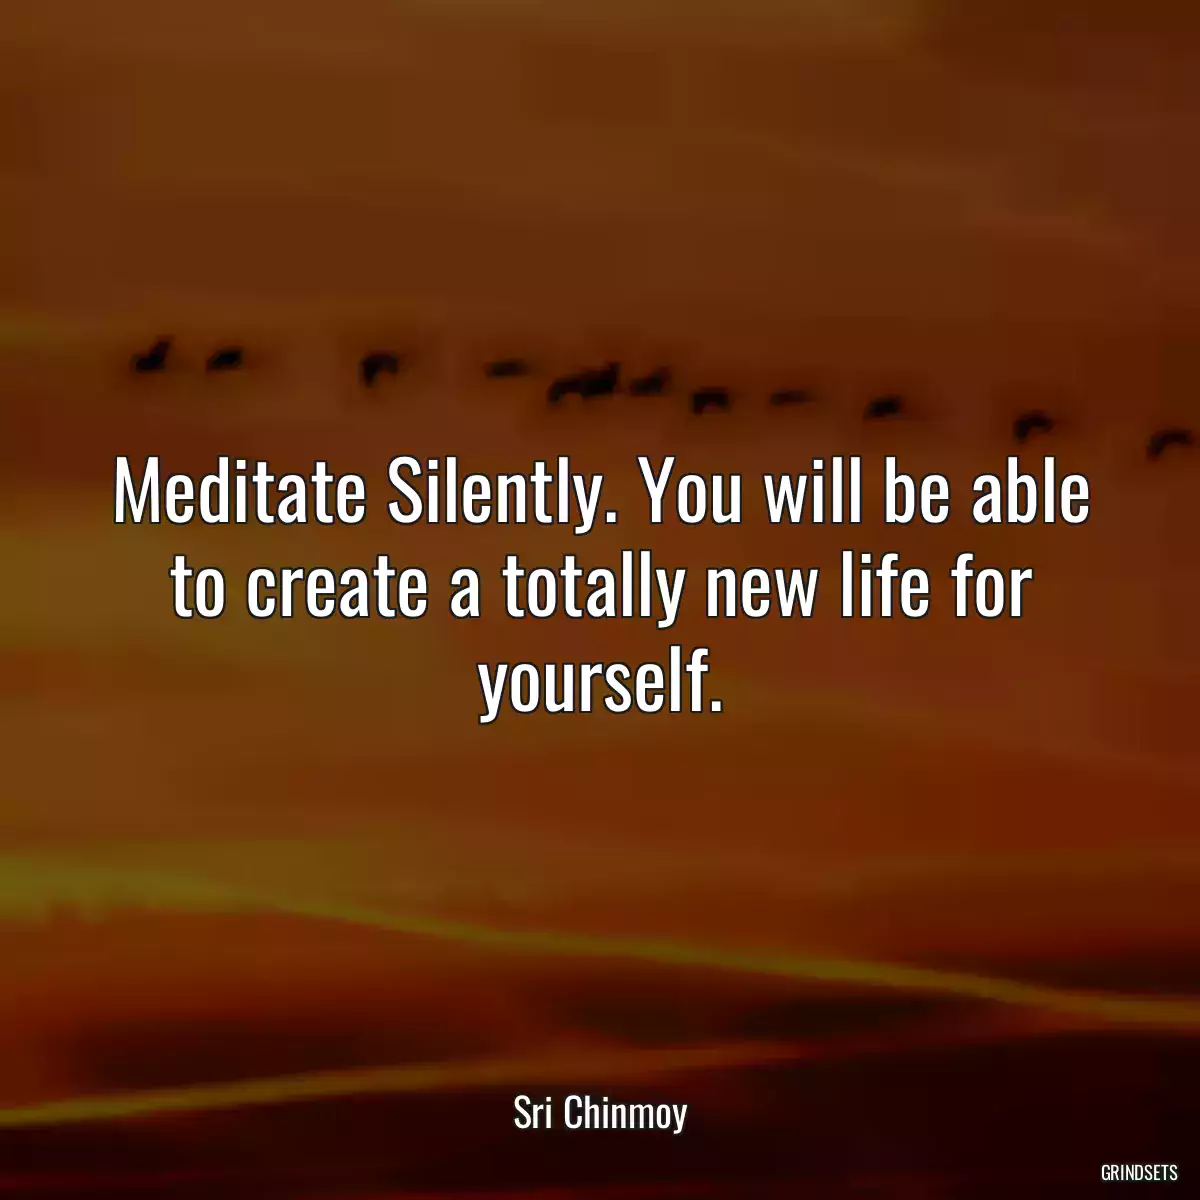 Meditate Silently. You will be able to create a totally new life for yourself.